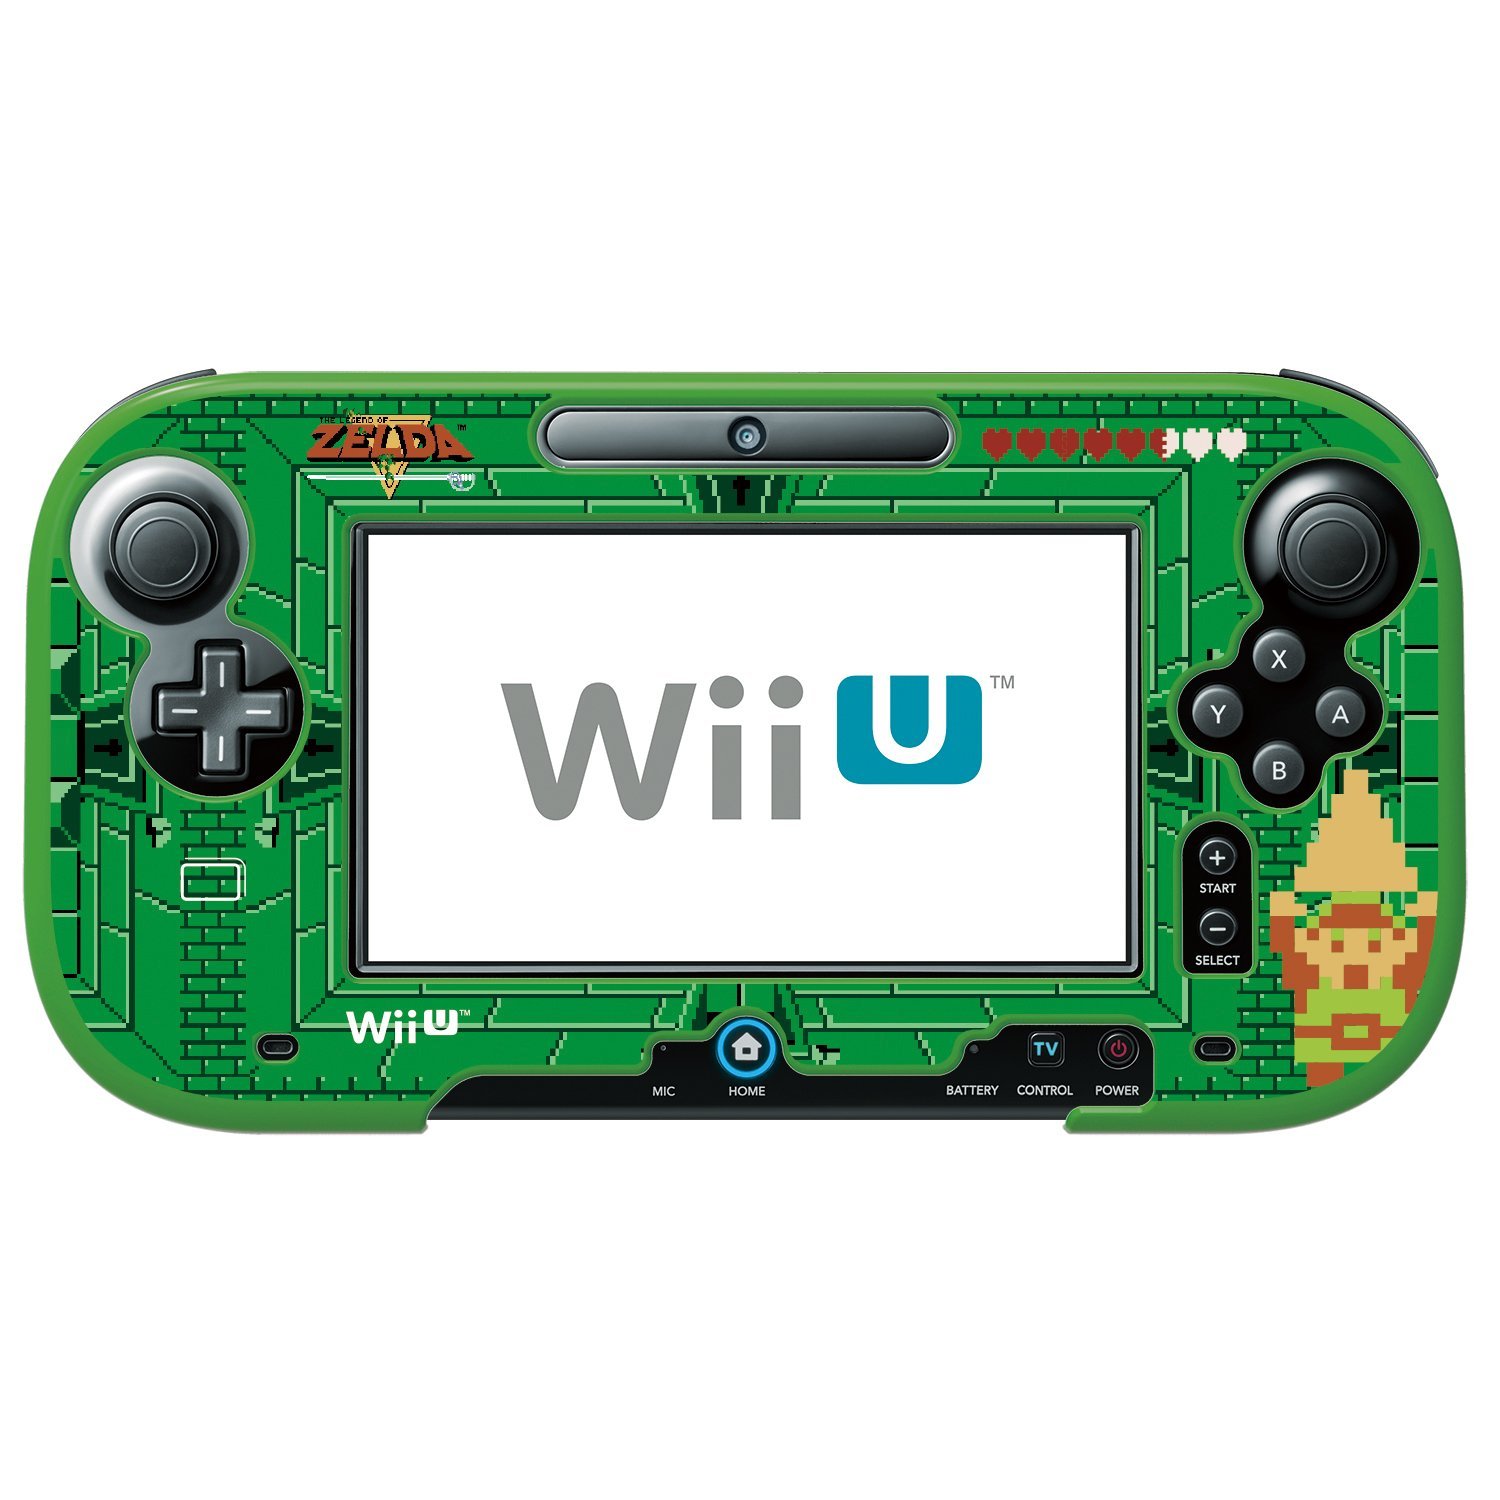 Invest the purpose Pack to put HORI coming out with a retro Zelda GamePad protector next month